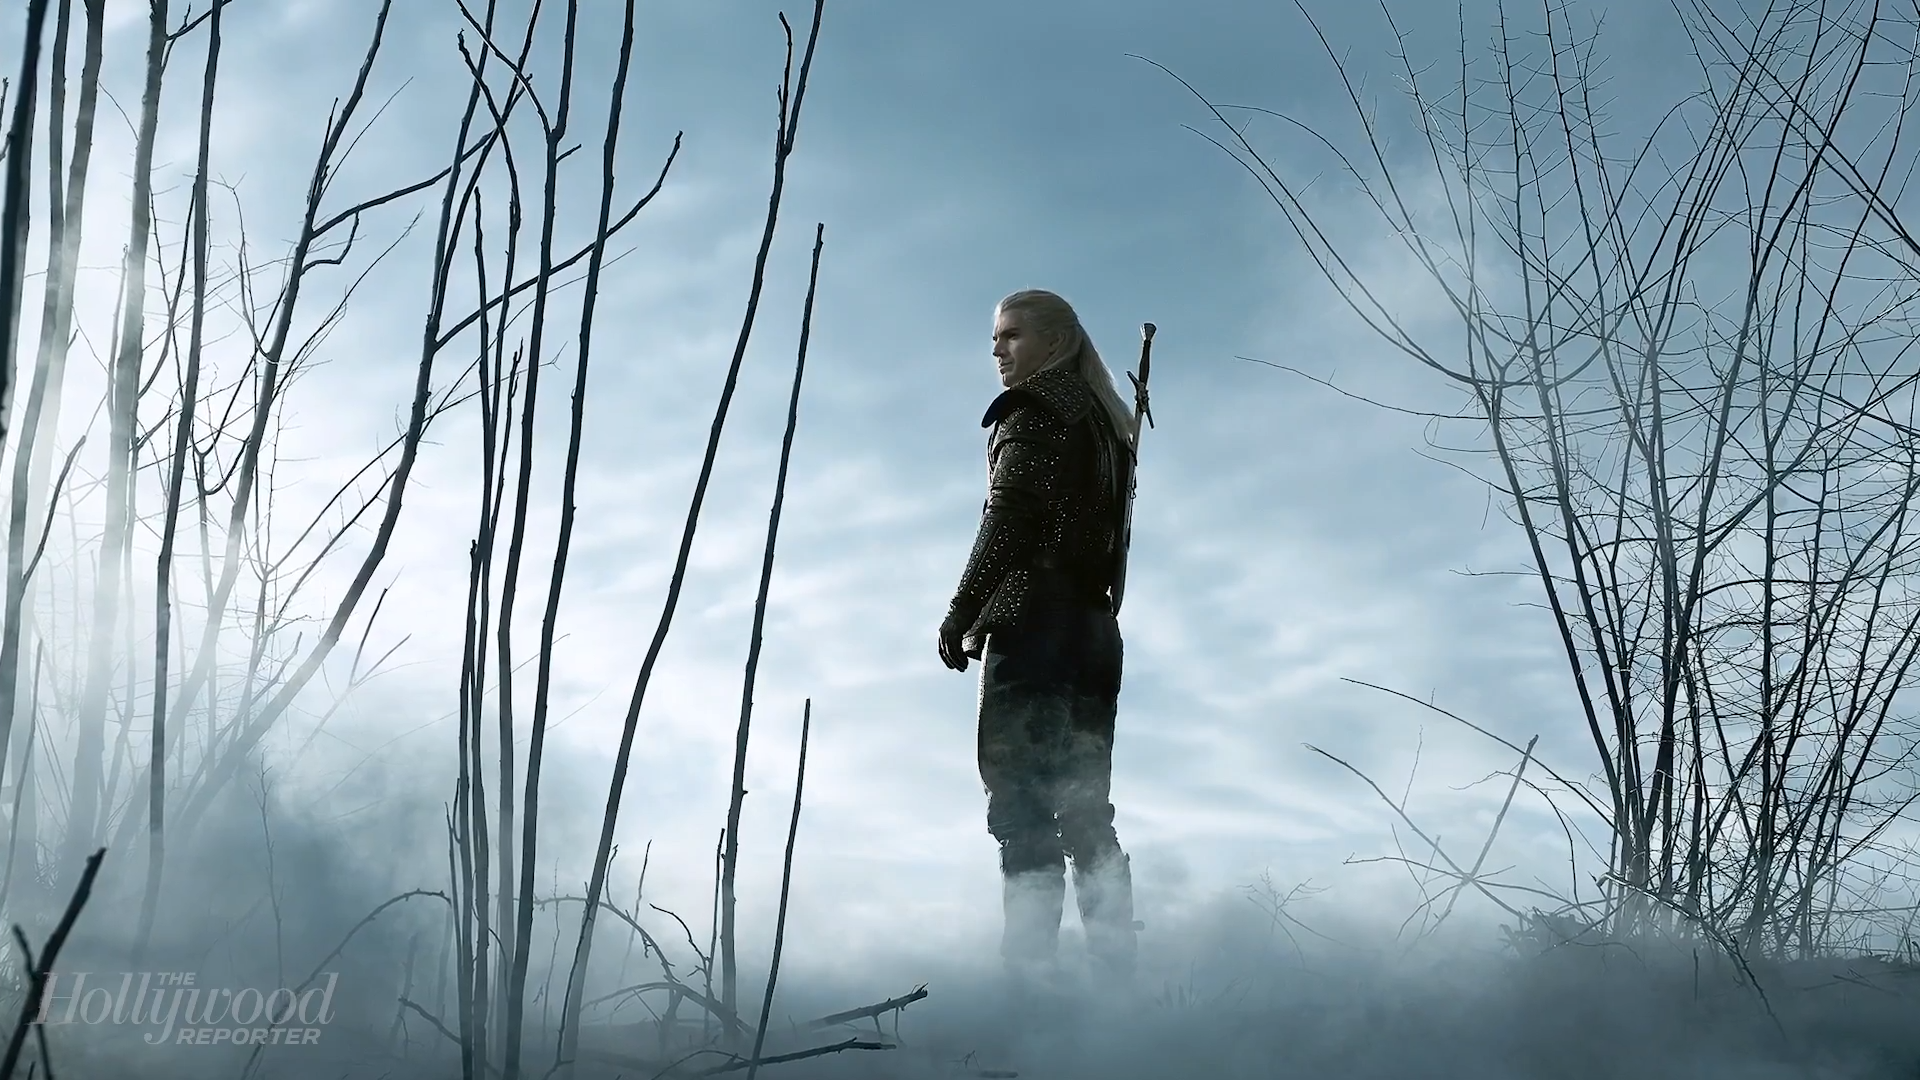 The Witcher Season New Footage Includes First Look At Kristofer